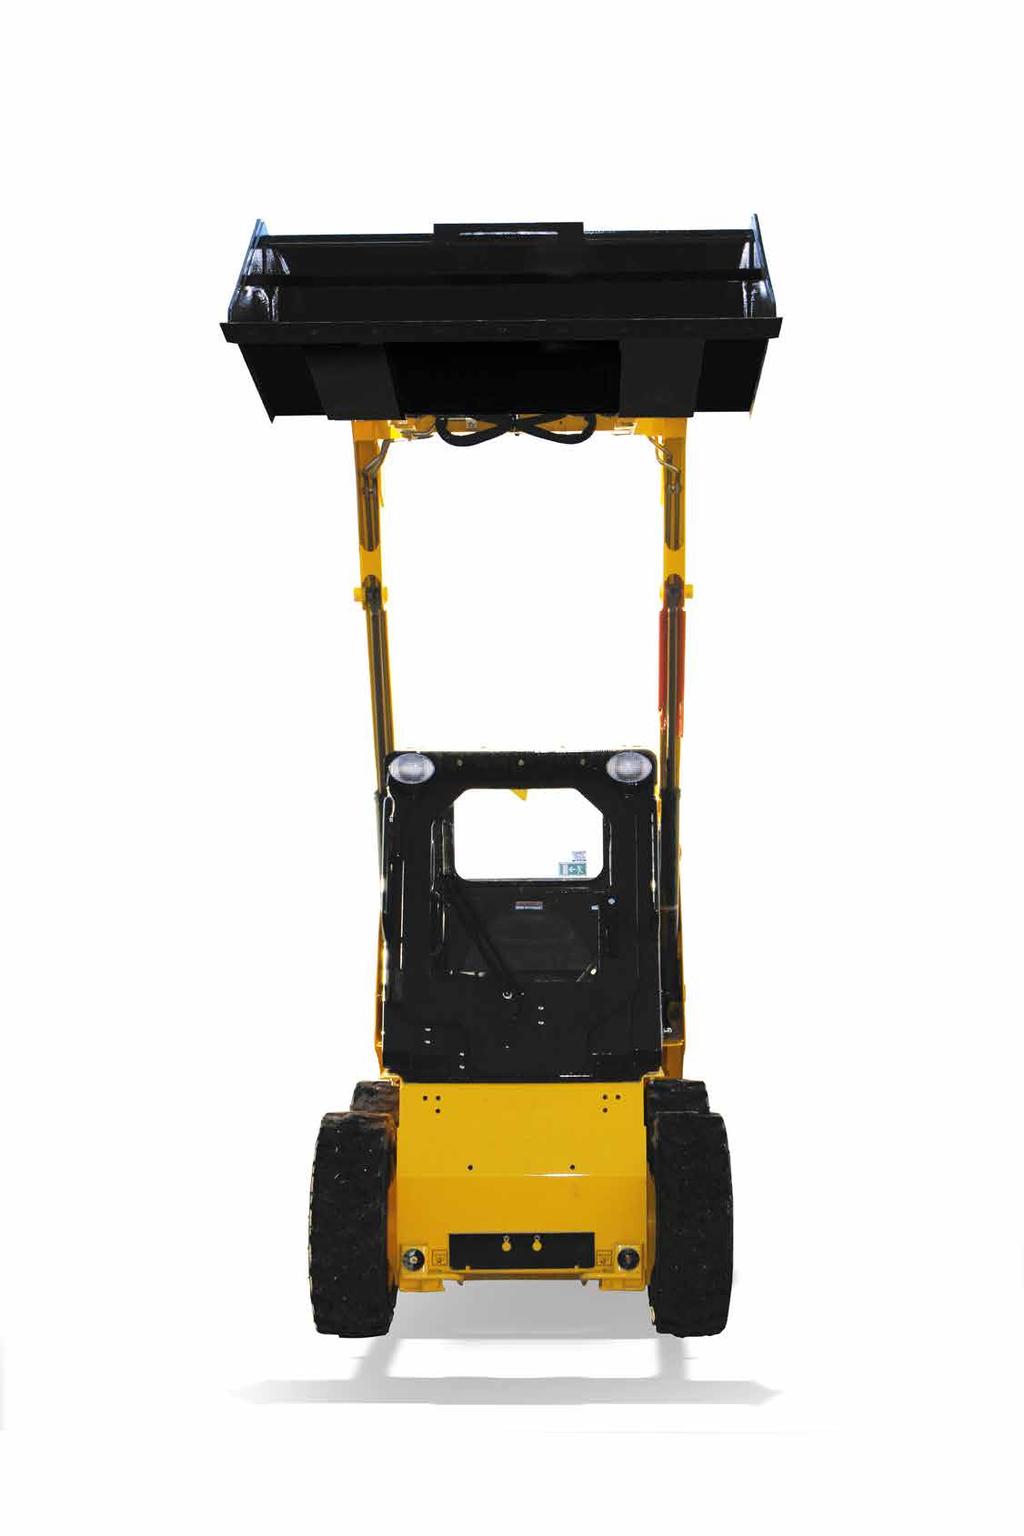 R105 POWER and PERFORMANCE COMPACT AND MANEUVERABLE The ultra compact R105 skid loader is built to go